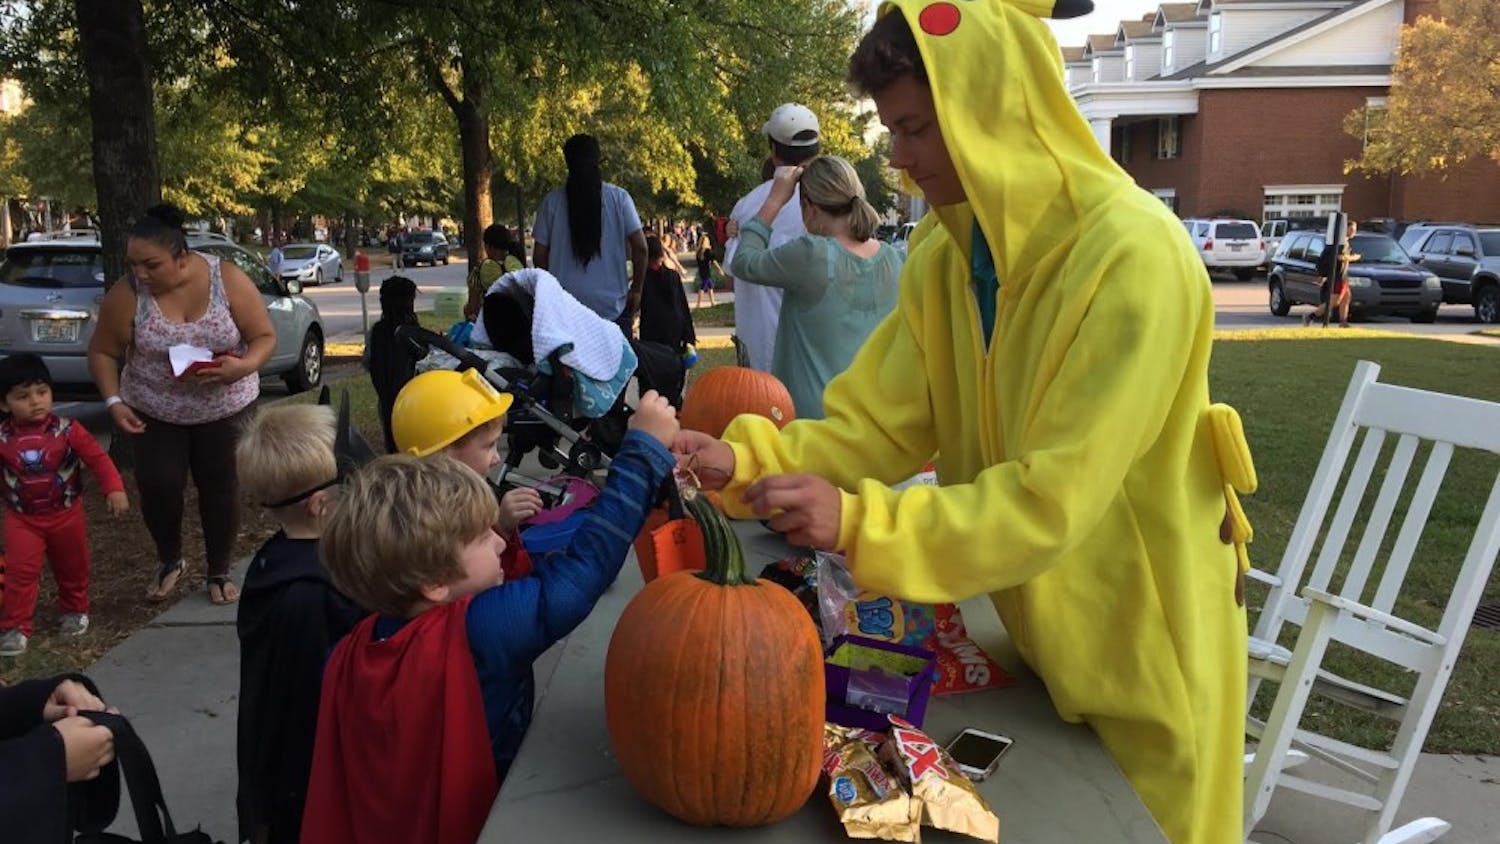 Superheroes, fairies, ghosts and more receive candy handed out by members of Greek organizations.